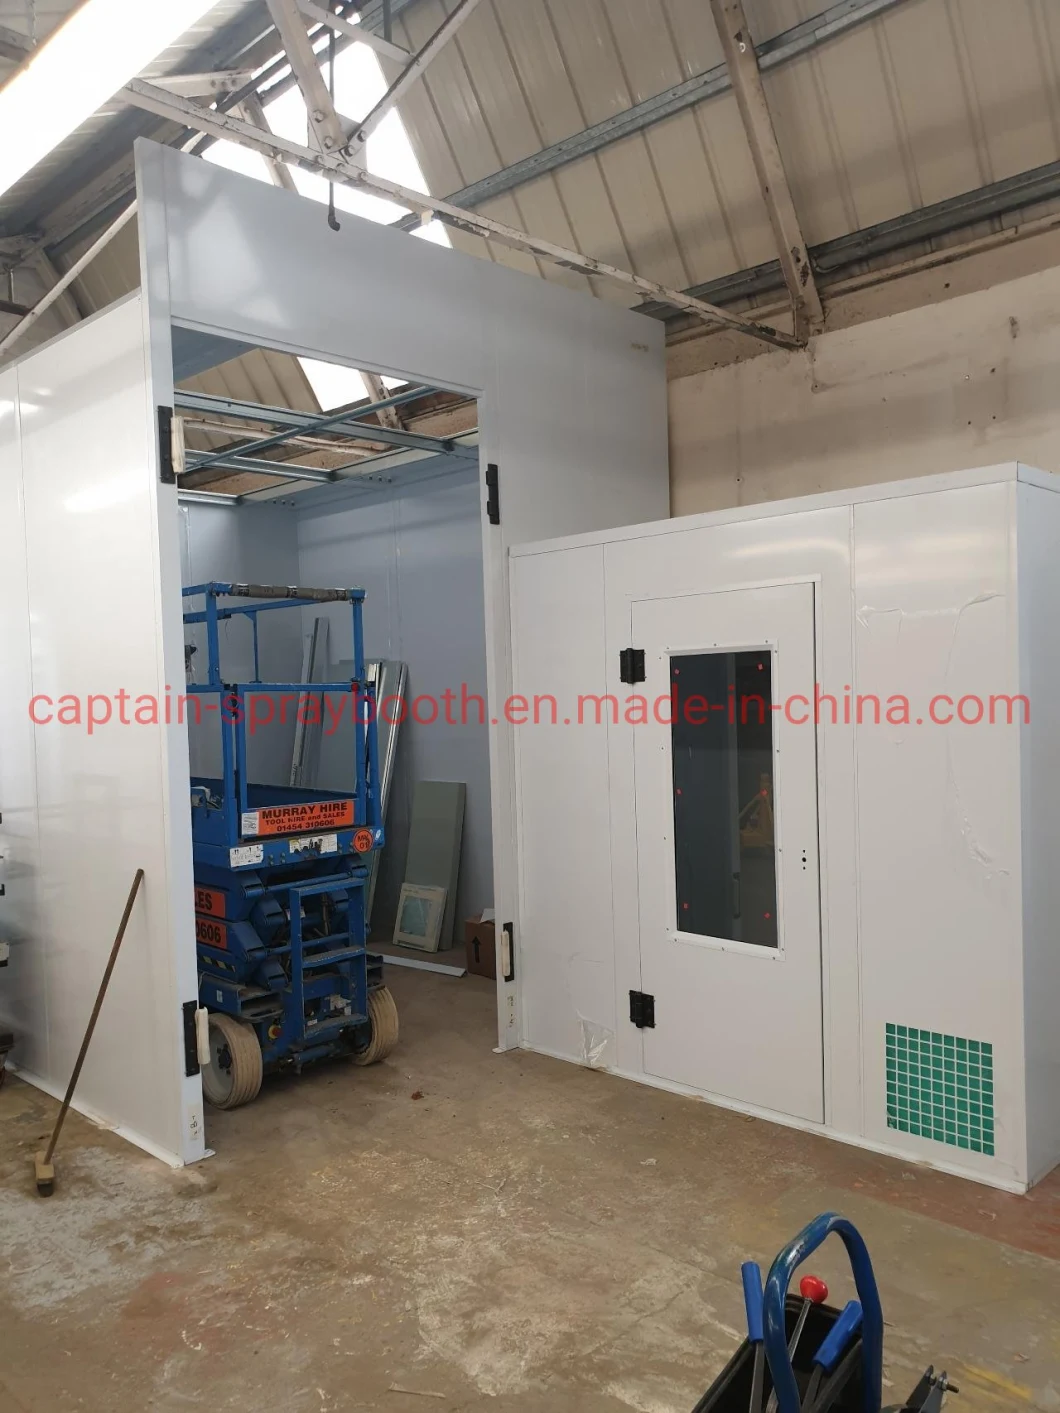 Free Price Quotes on Paint Spray Booth / Paint Mixing Room